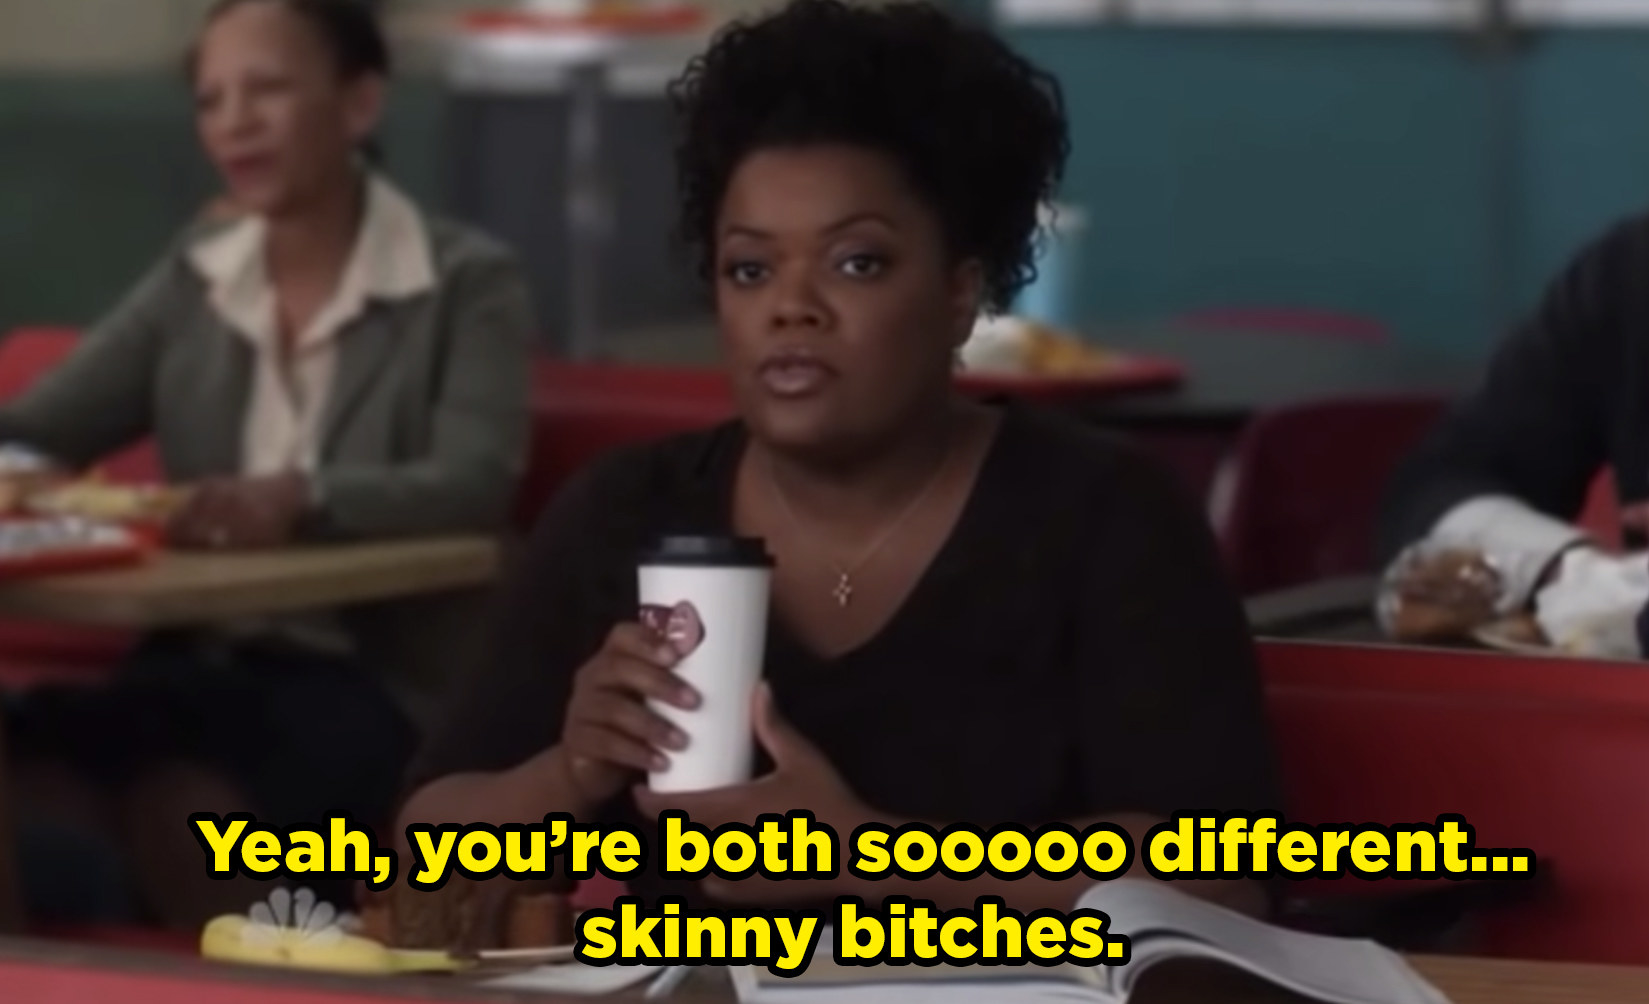 Shirley making fun of her friends under her breath, saying "Yeah, you're both SO different... skinny bitches."